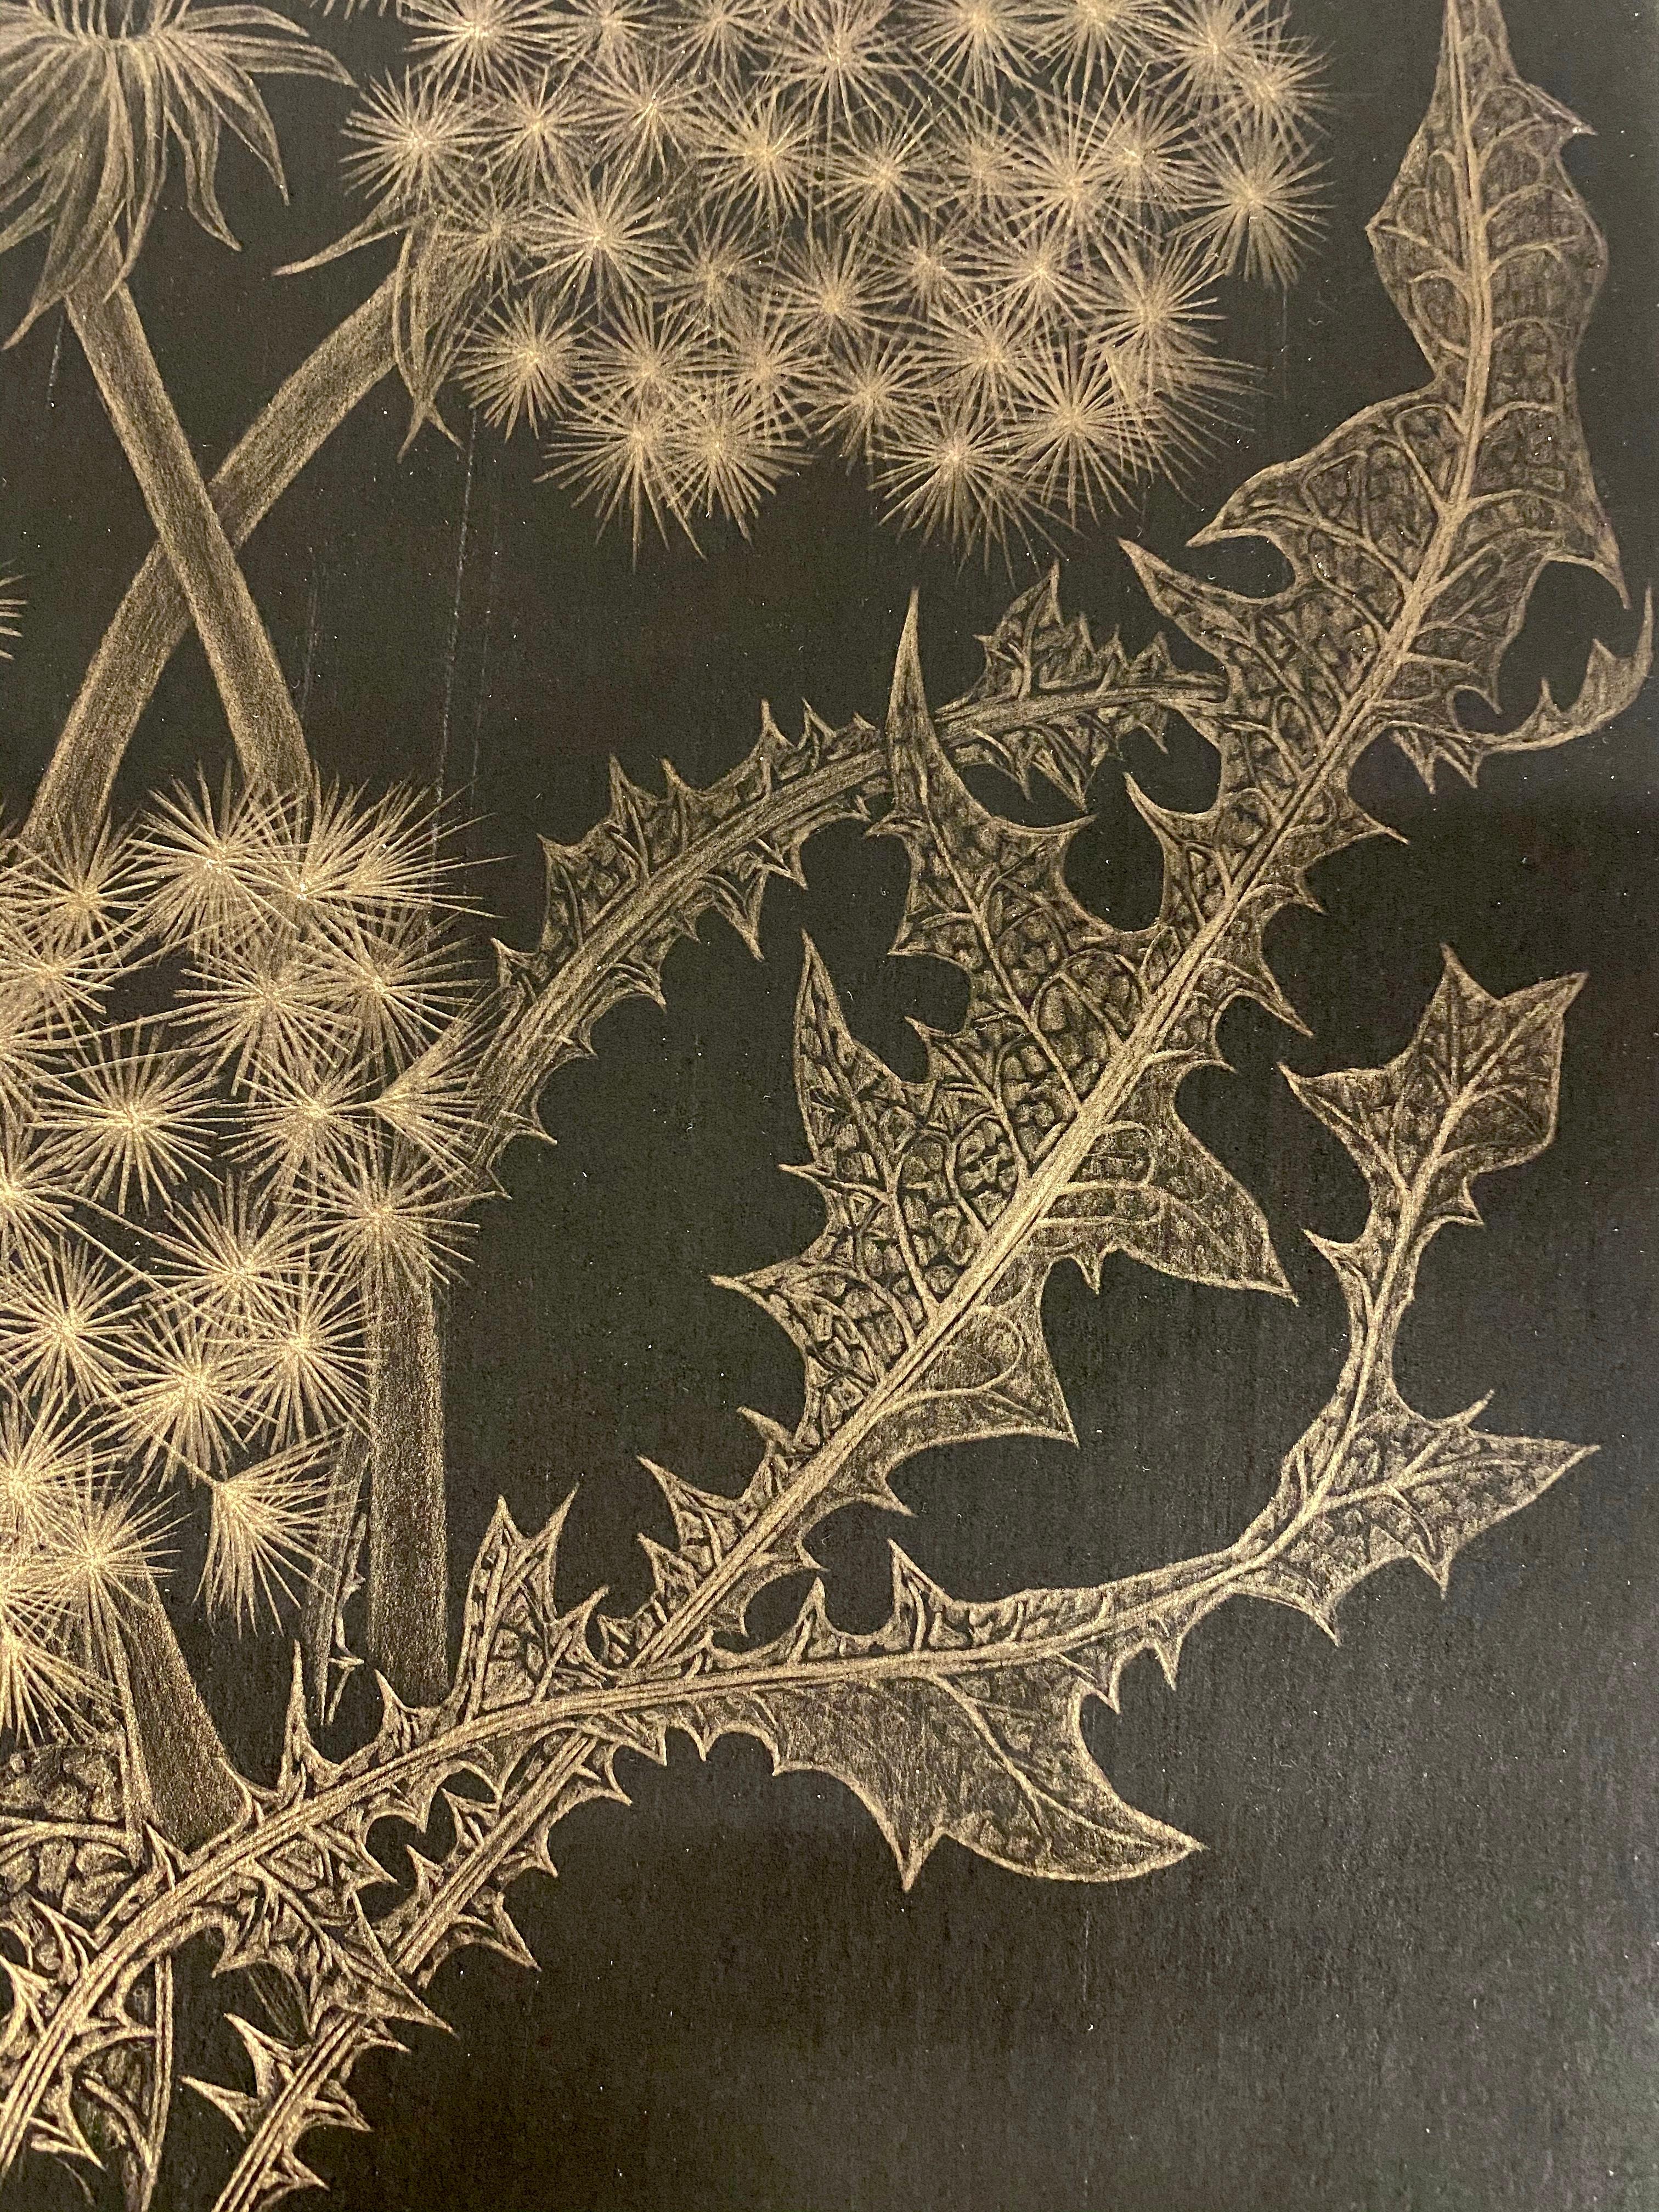 Dandelions with Bud, Small Botanical Drawing on Black Paper made with 14K Gold 1